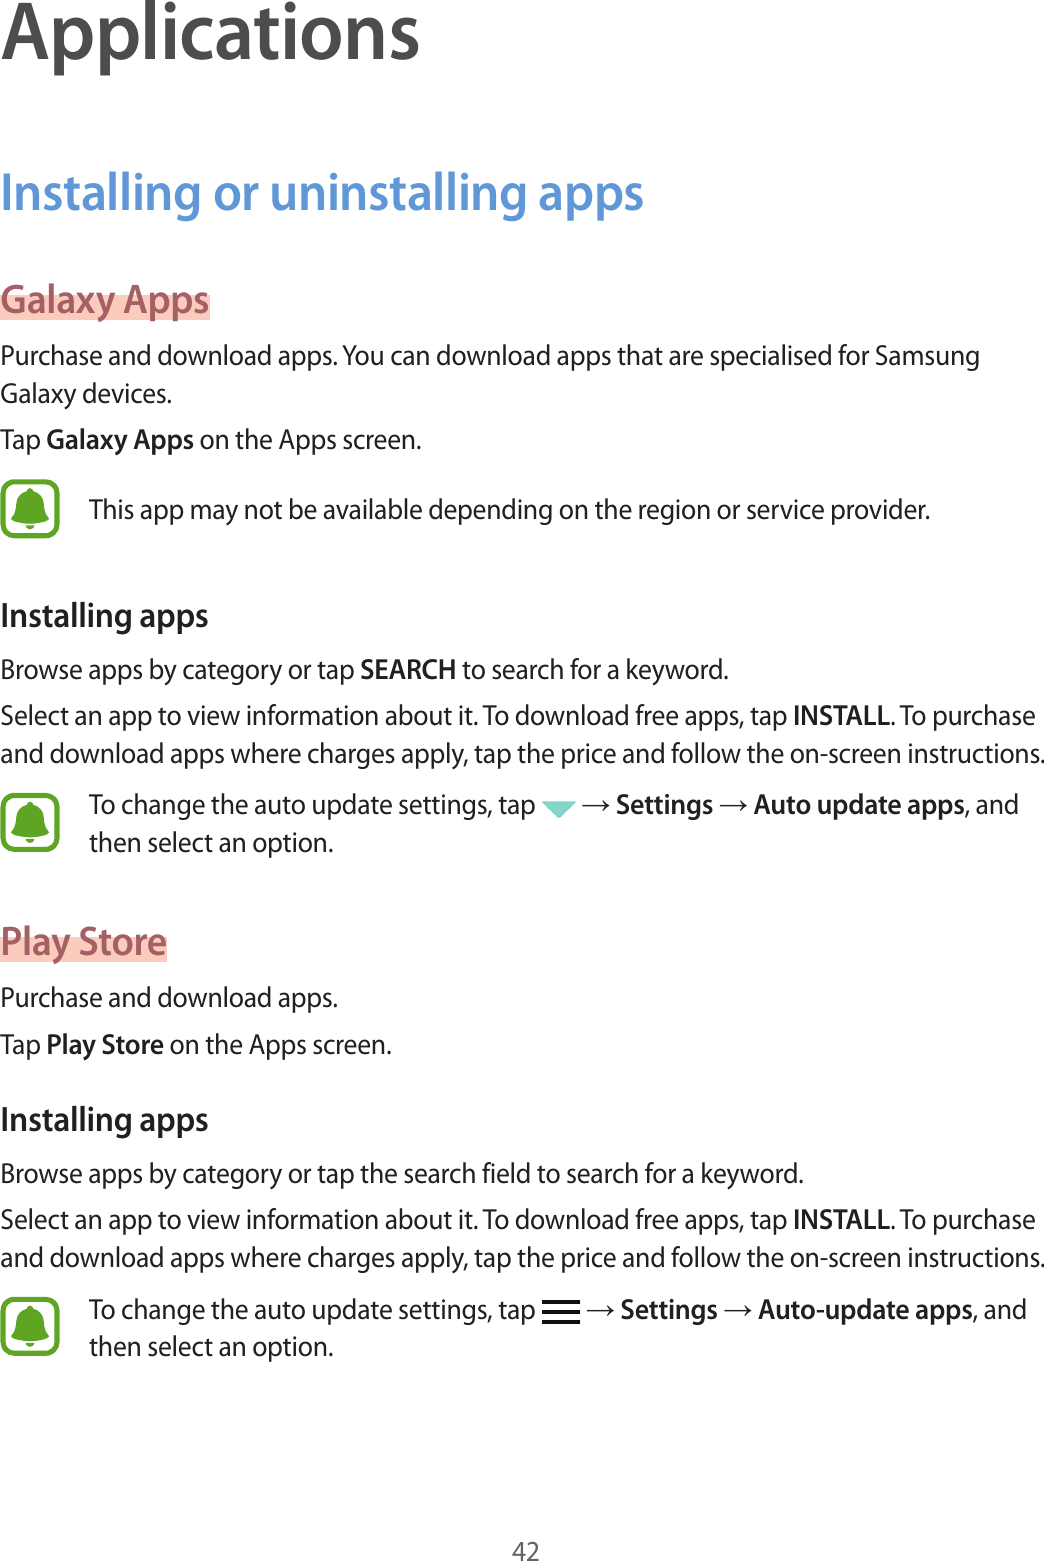 42ApplicationsInstalling or uninstalling appsGalaxy AppsPurchase and download apps. You can download apps that are specialised for Samsung Galaxy devices.Tap Galaxy Apps on the Apps screen.This app may not be available depending on the region or service provider.Installing appsBrowse apps by category or tap SEARCH to search for a keyword.Select an app to view information about it. To download free apps, tap INSTALL. To purchase and download apps where charges apply, tap the price and follow the on-screen instructions.To change the auto update settings, tap   → Settings → Auto update apps, and then select an option.Play StorePurchase and download apps.Tap Play Store on the Apps screen.Installing appsBrowse apps by category or tap the search field to search for a keyword.Select an app to view information about it. To download free apps, tap INSTALL. To purchase and download apps where charges apply, tap the price and follow the on-screen instructions.To change the auto update settings, tap   → Settings → Auto-update apps, and then select an option.